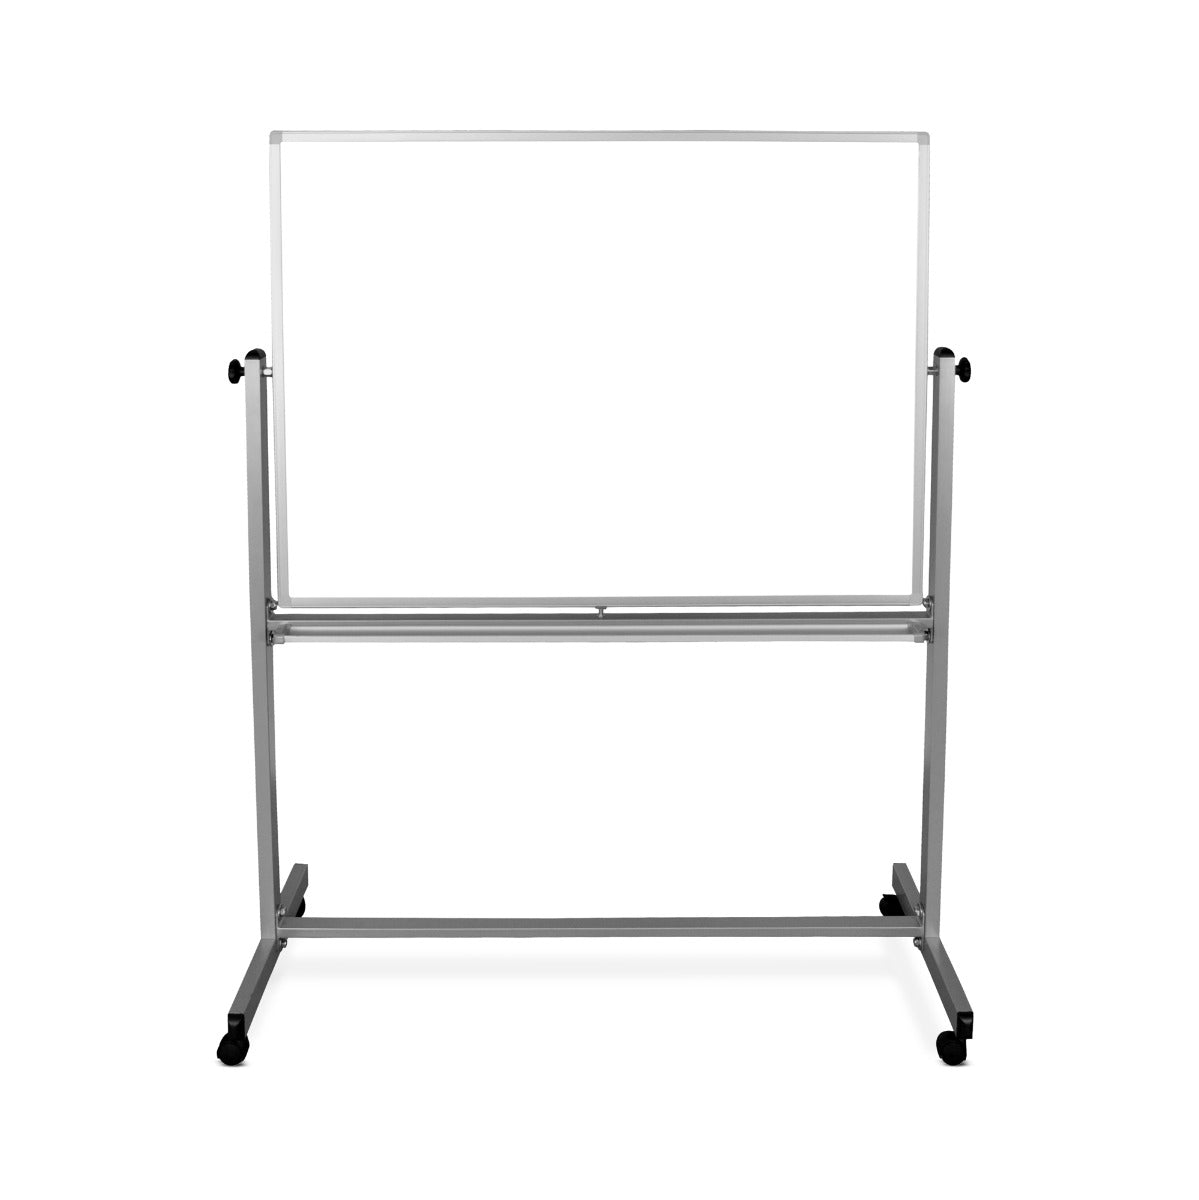 Mobile Whiteboard Magnetic, Reversible Dry Erase Markerboard - 48"W x 36"H - SchoolOutlet